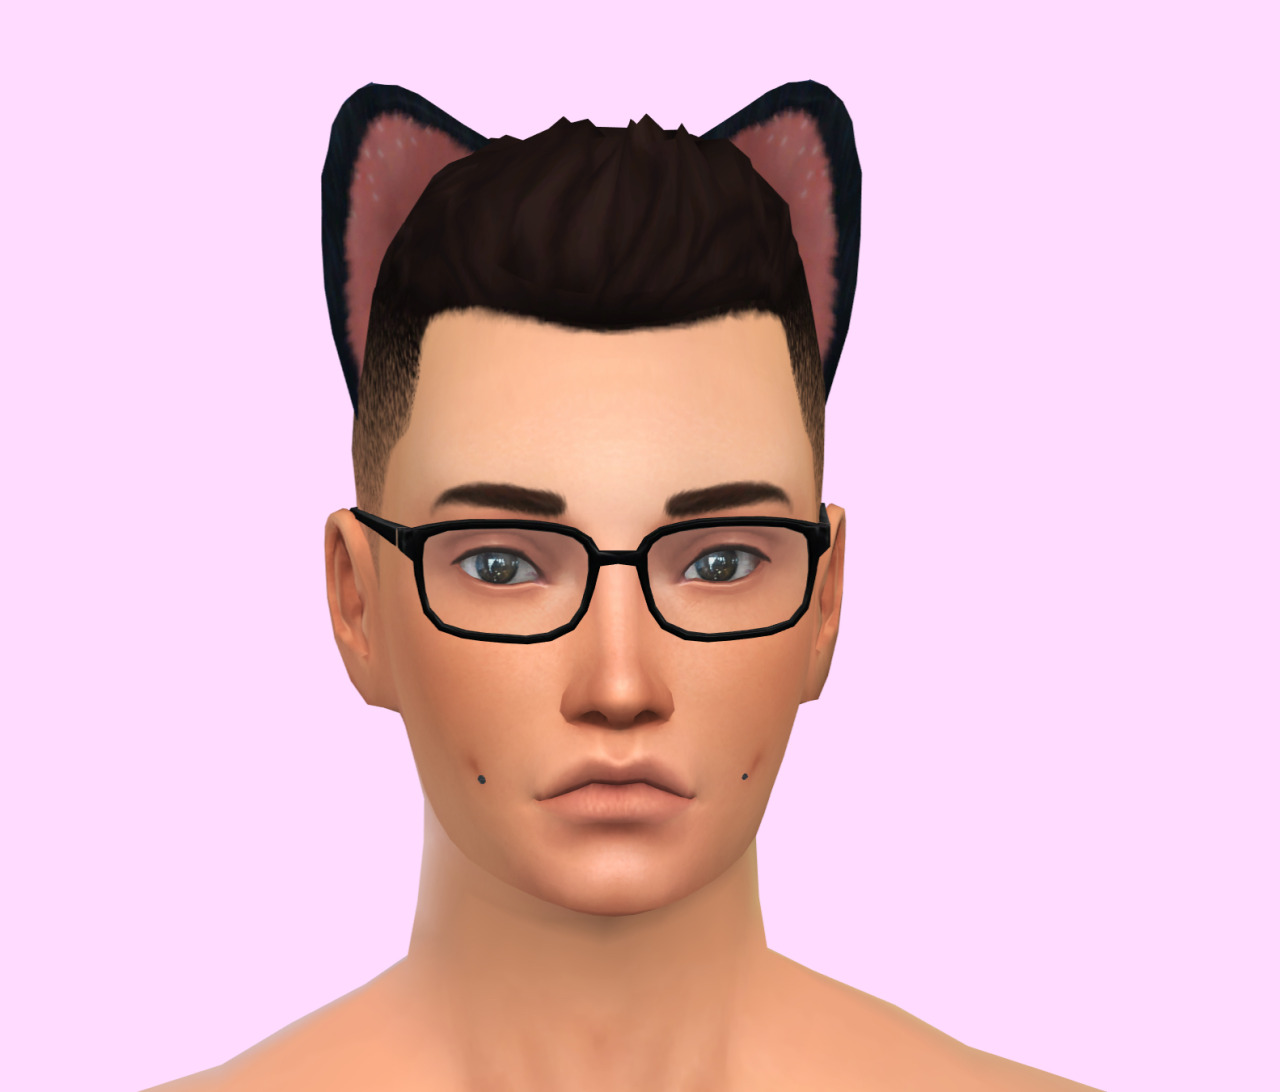 piercing Sims 4 dimple